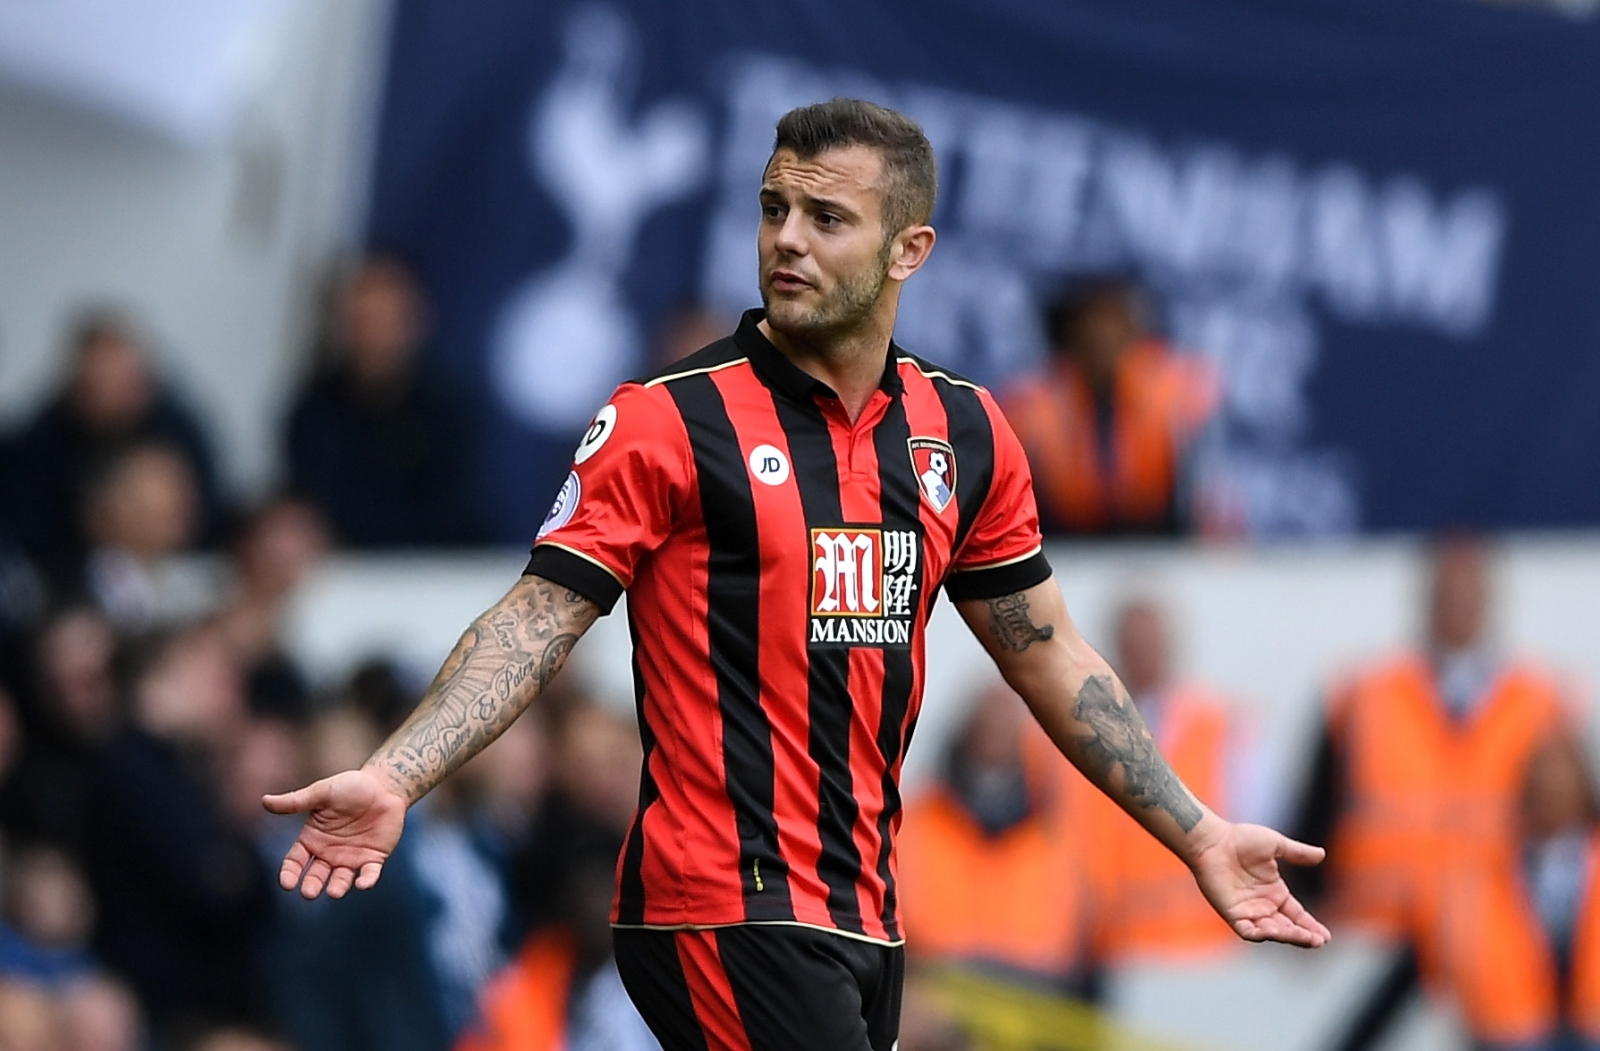 Jack Wilshere Expected To Stay At Arsenal As Arsene Wenger